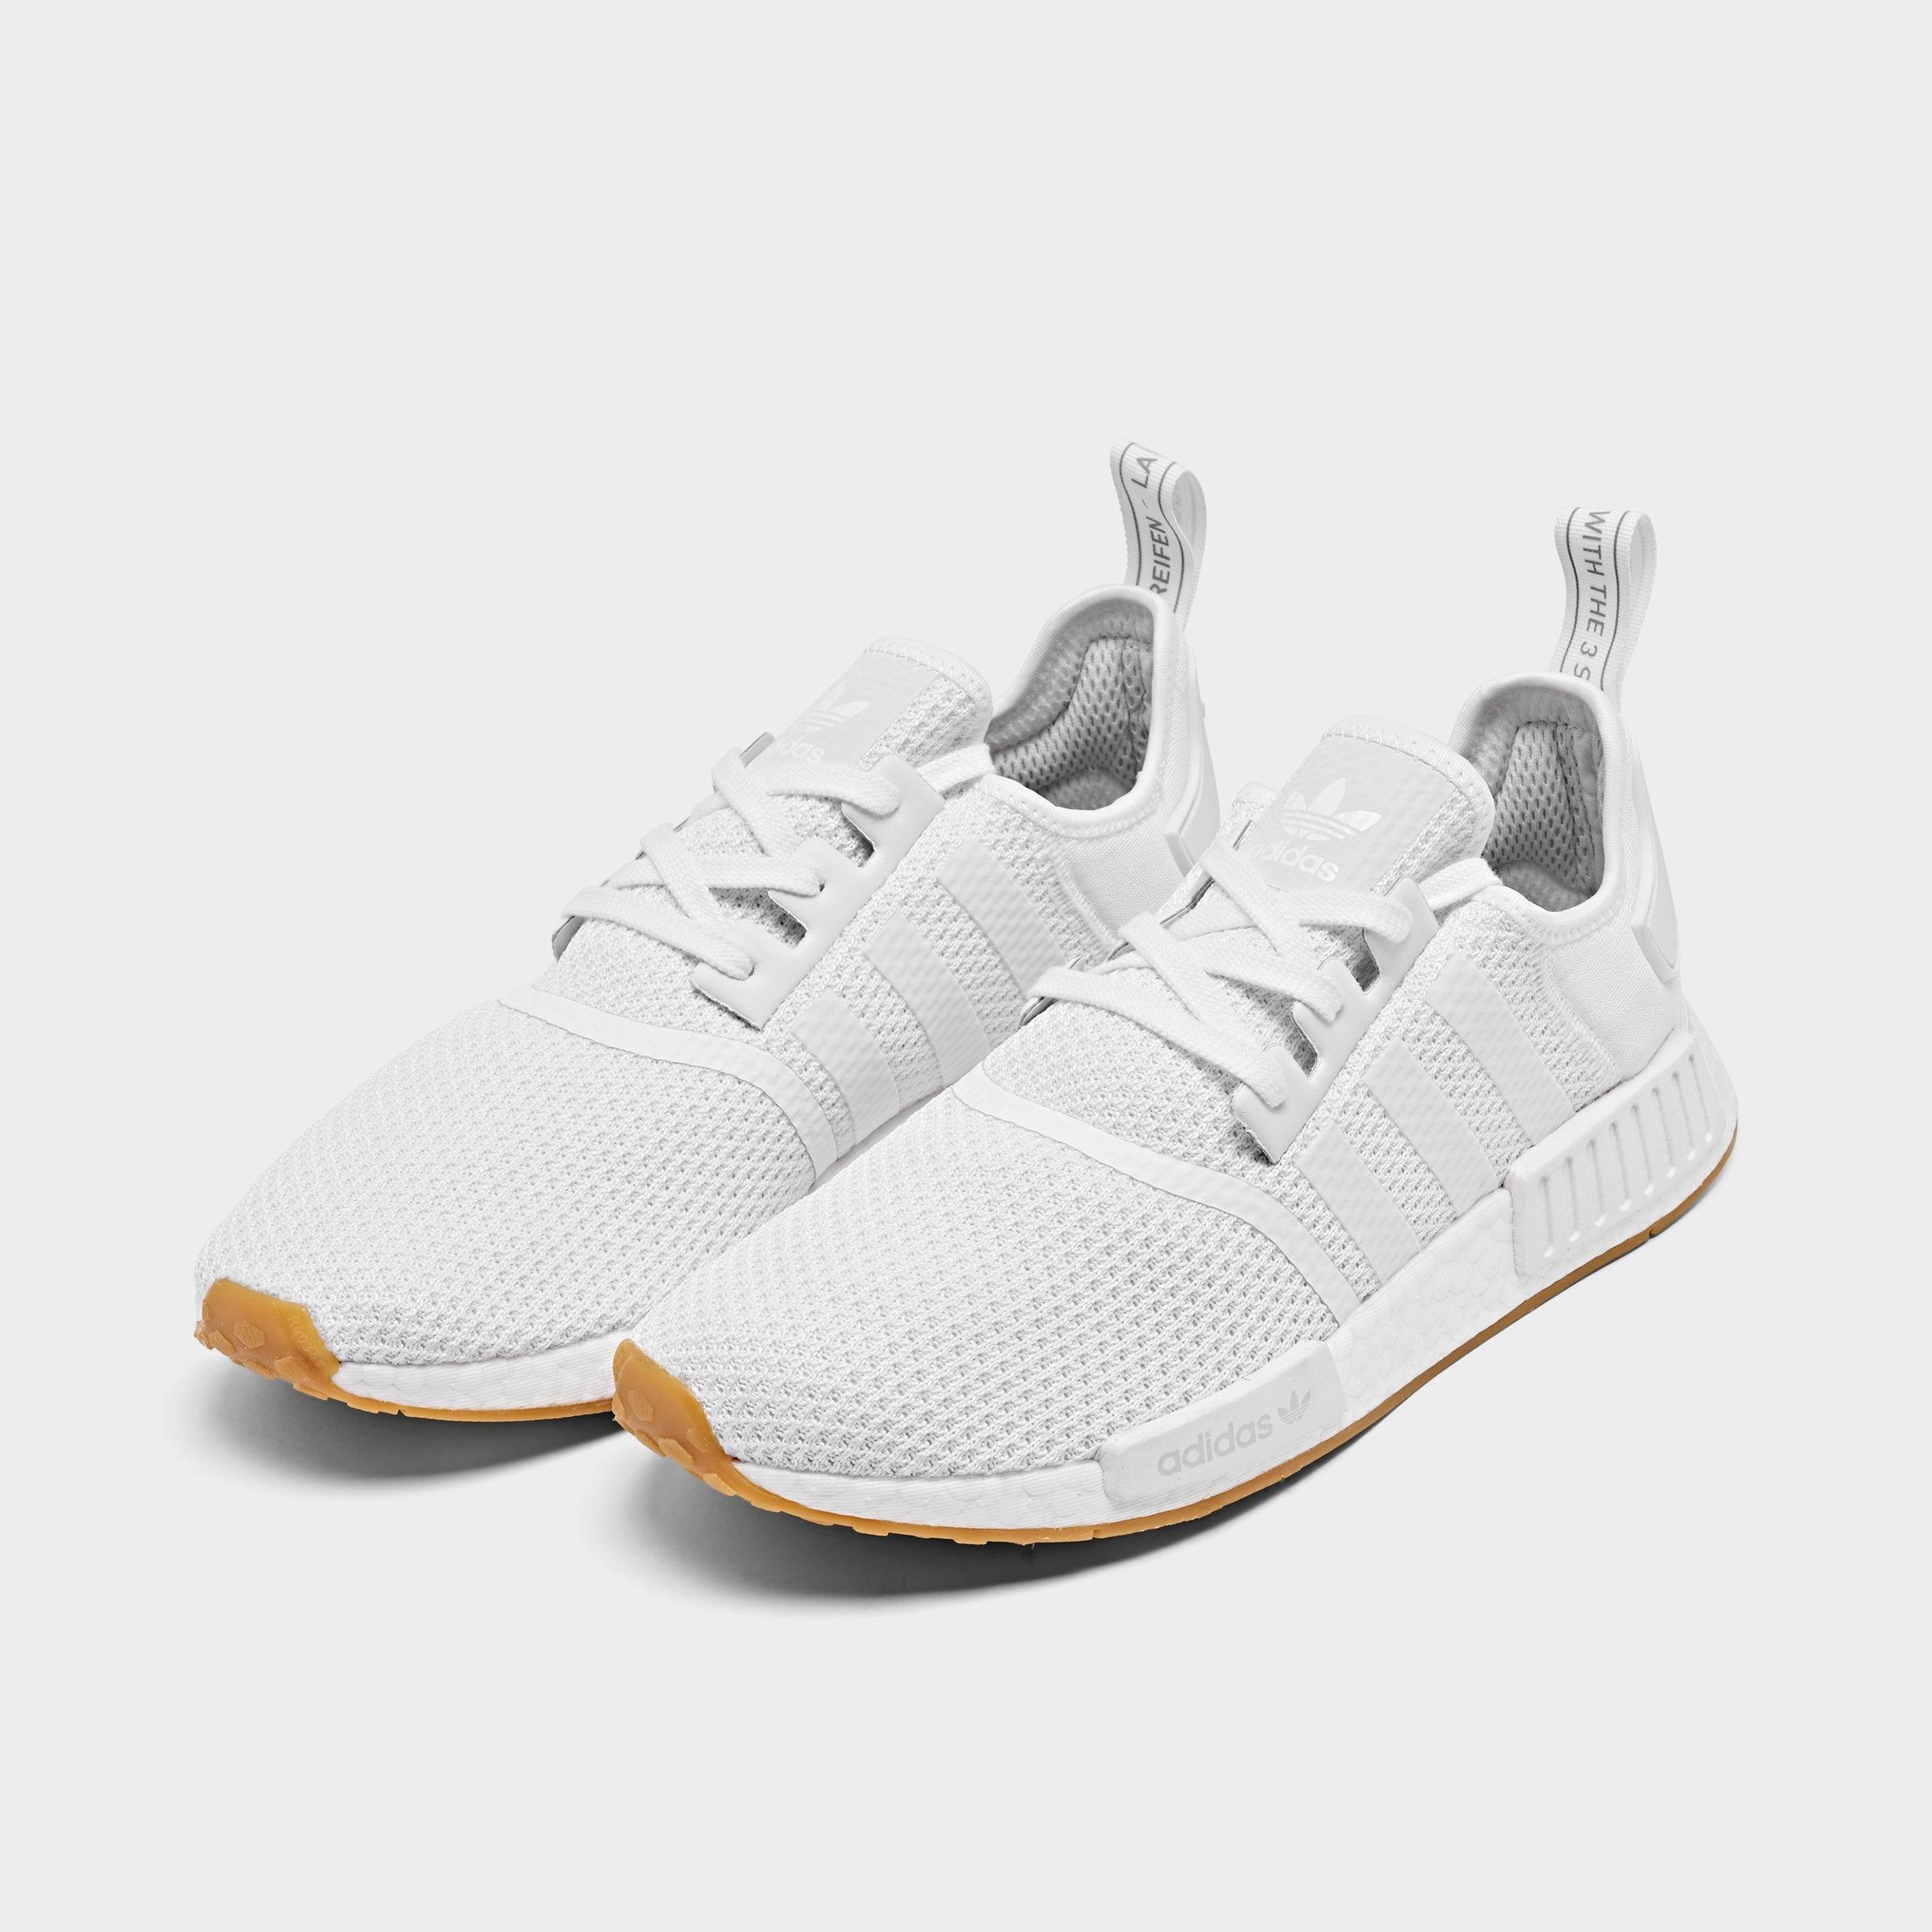 nmd runner r1 casual shoes